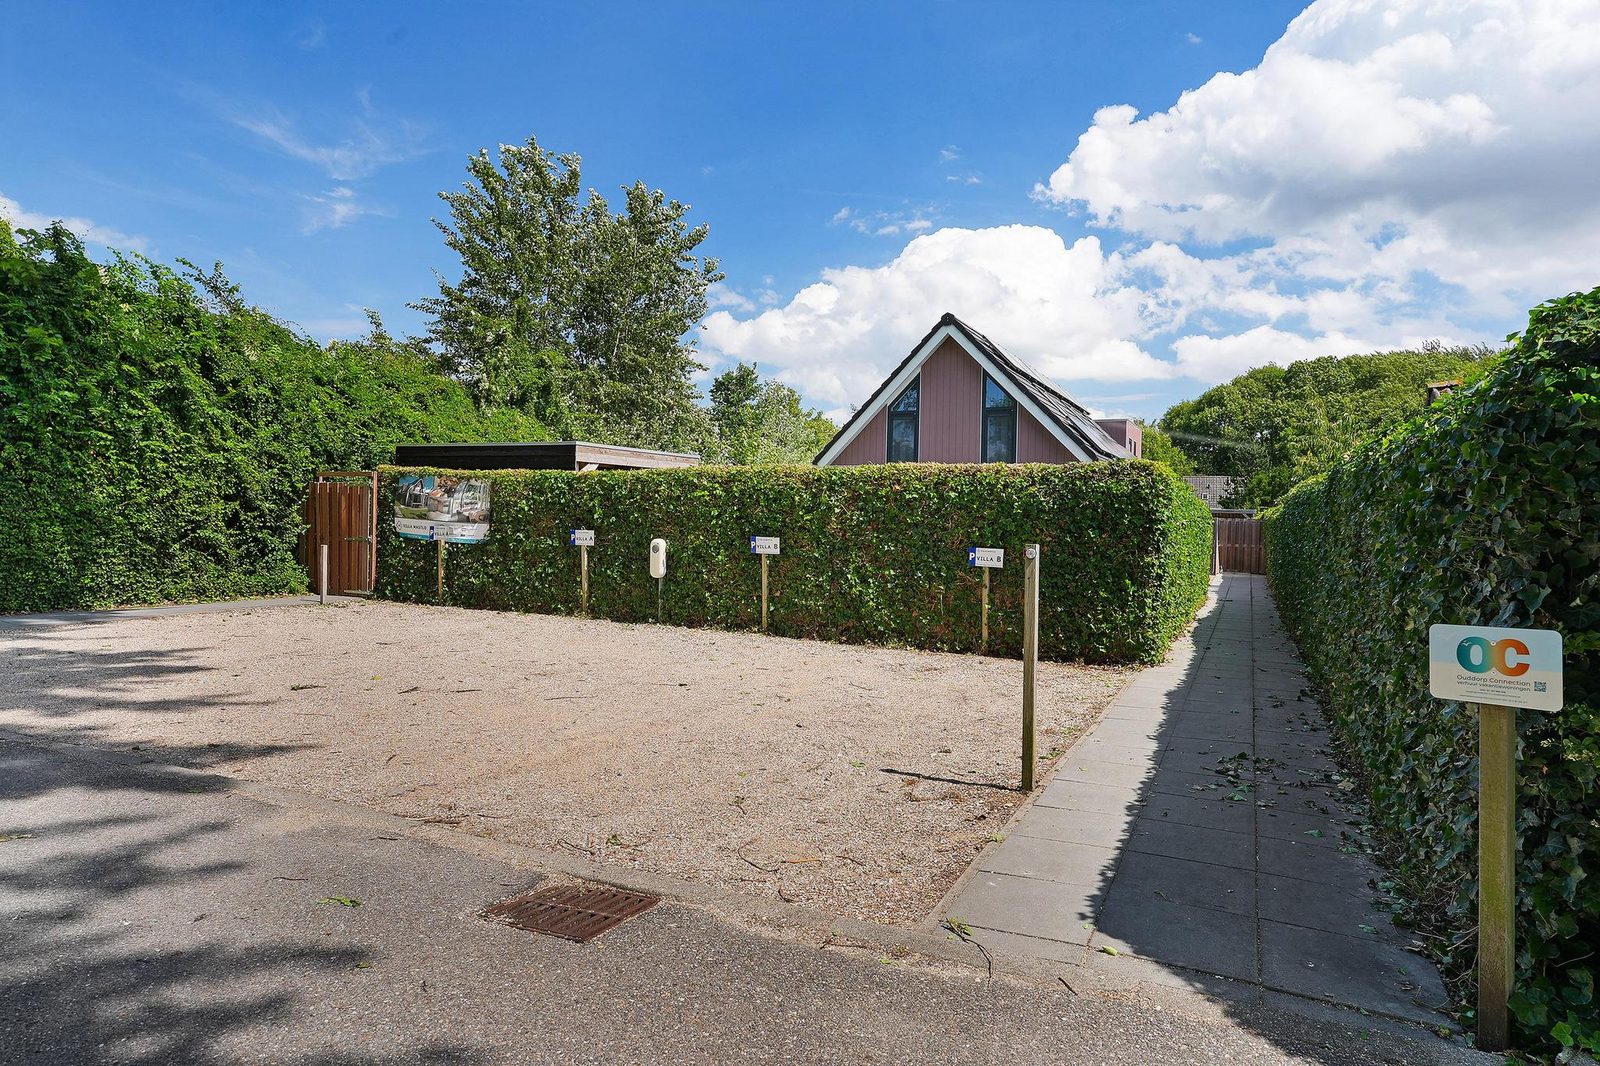 Oude Nieuwelandseweg 33B - Ouddorp - Villa Hopper (with jacuzzi, extra costs for use)